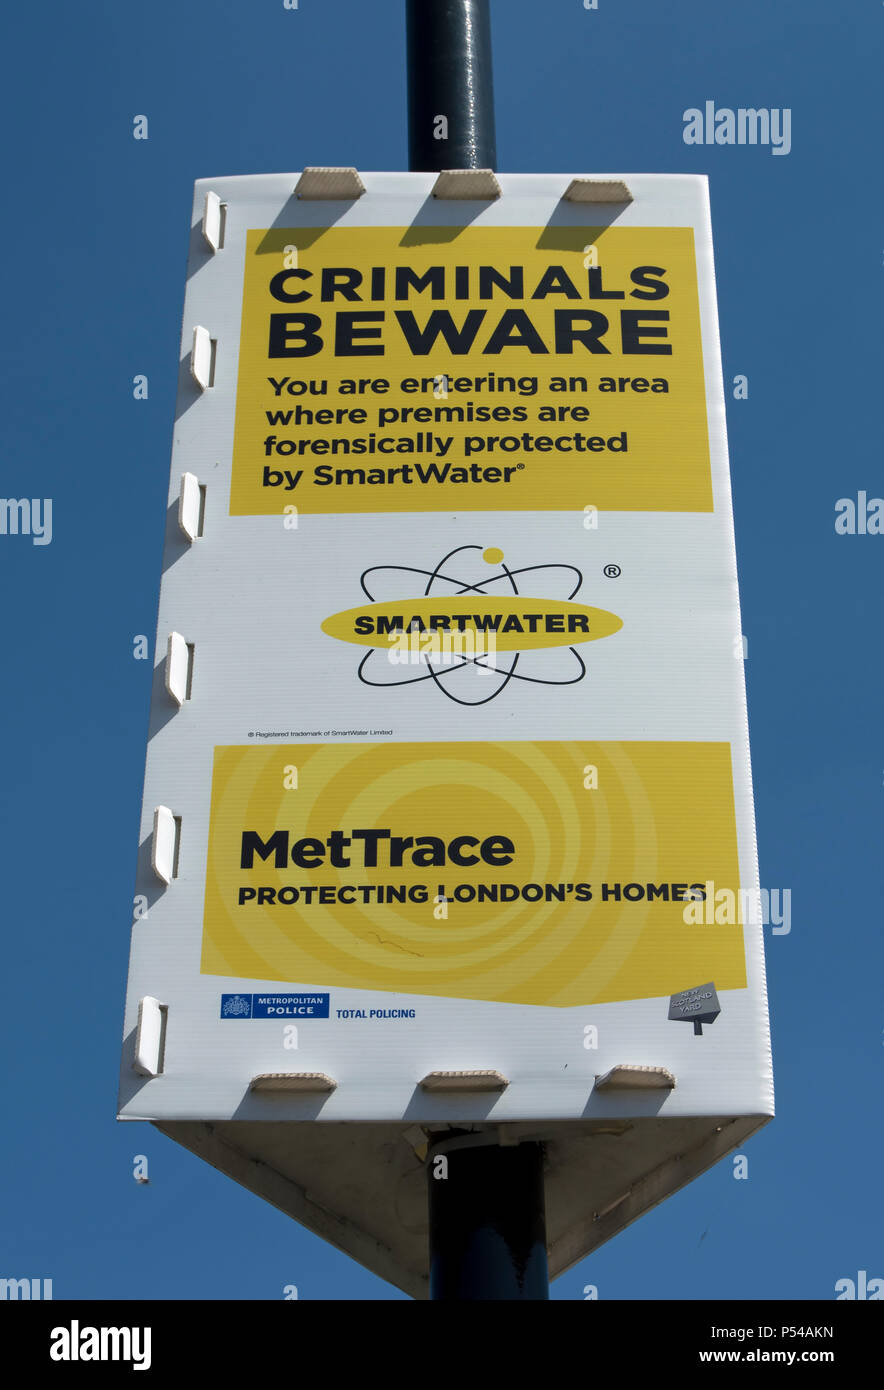 metropolitian police criminals beware sign, promoting mettrace and sweetwater initiatives to combat burglaries, in chiswick, london, england Stock Photo